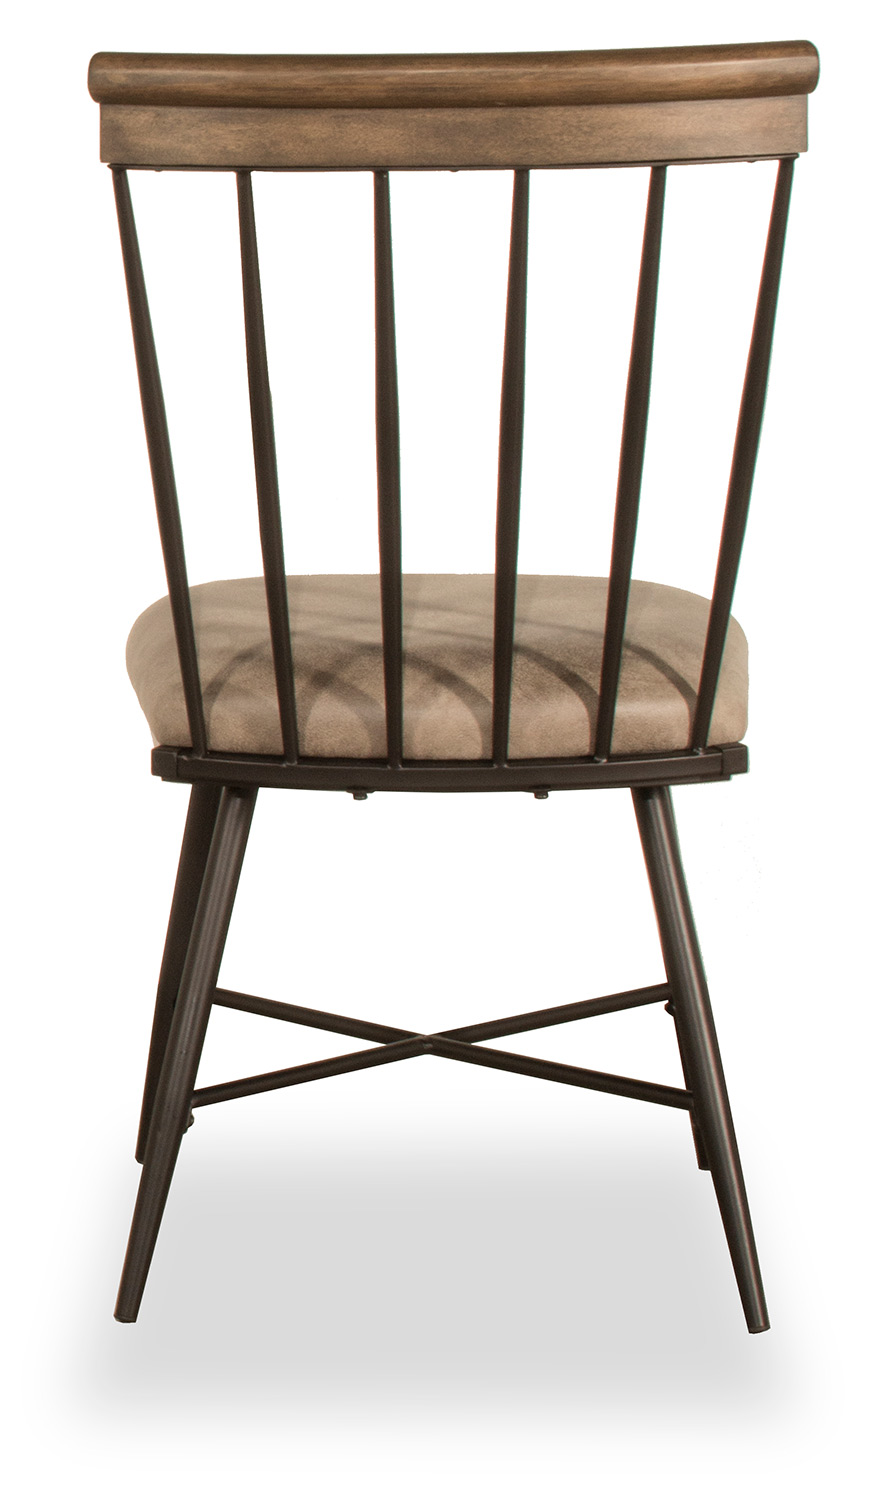 Hillsdale Forest Hill Dining Chair - Brown